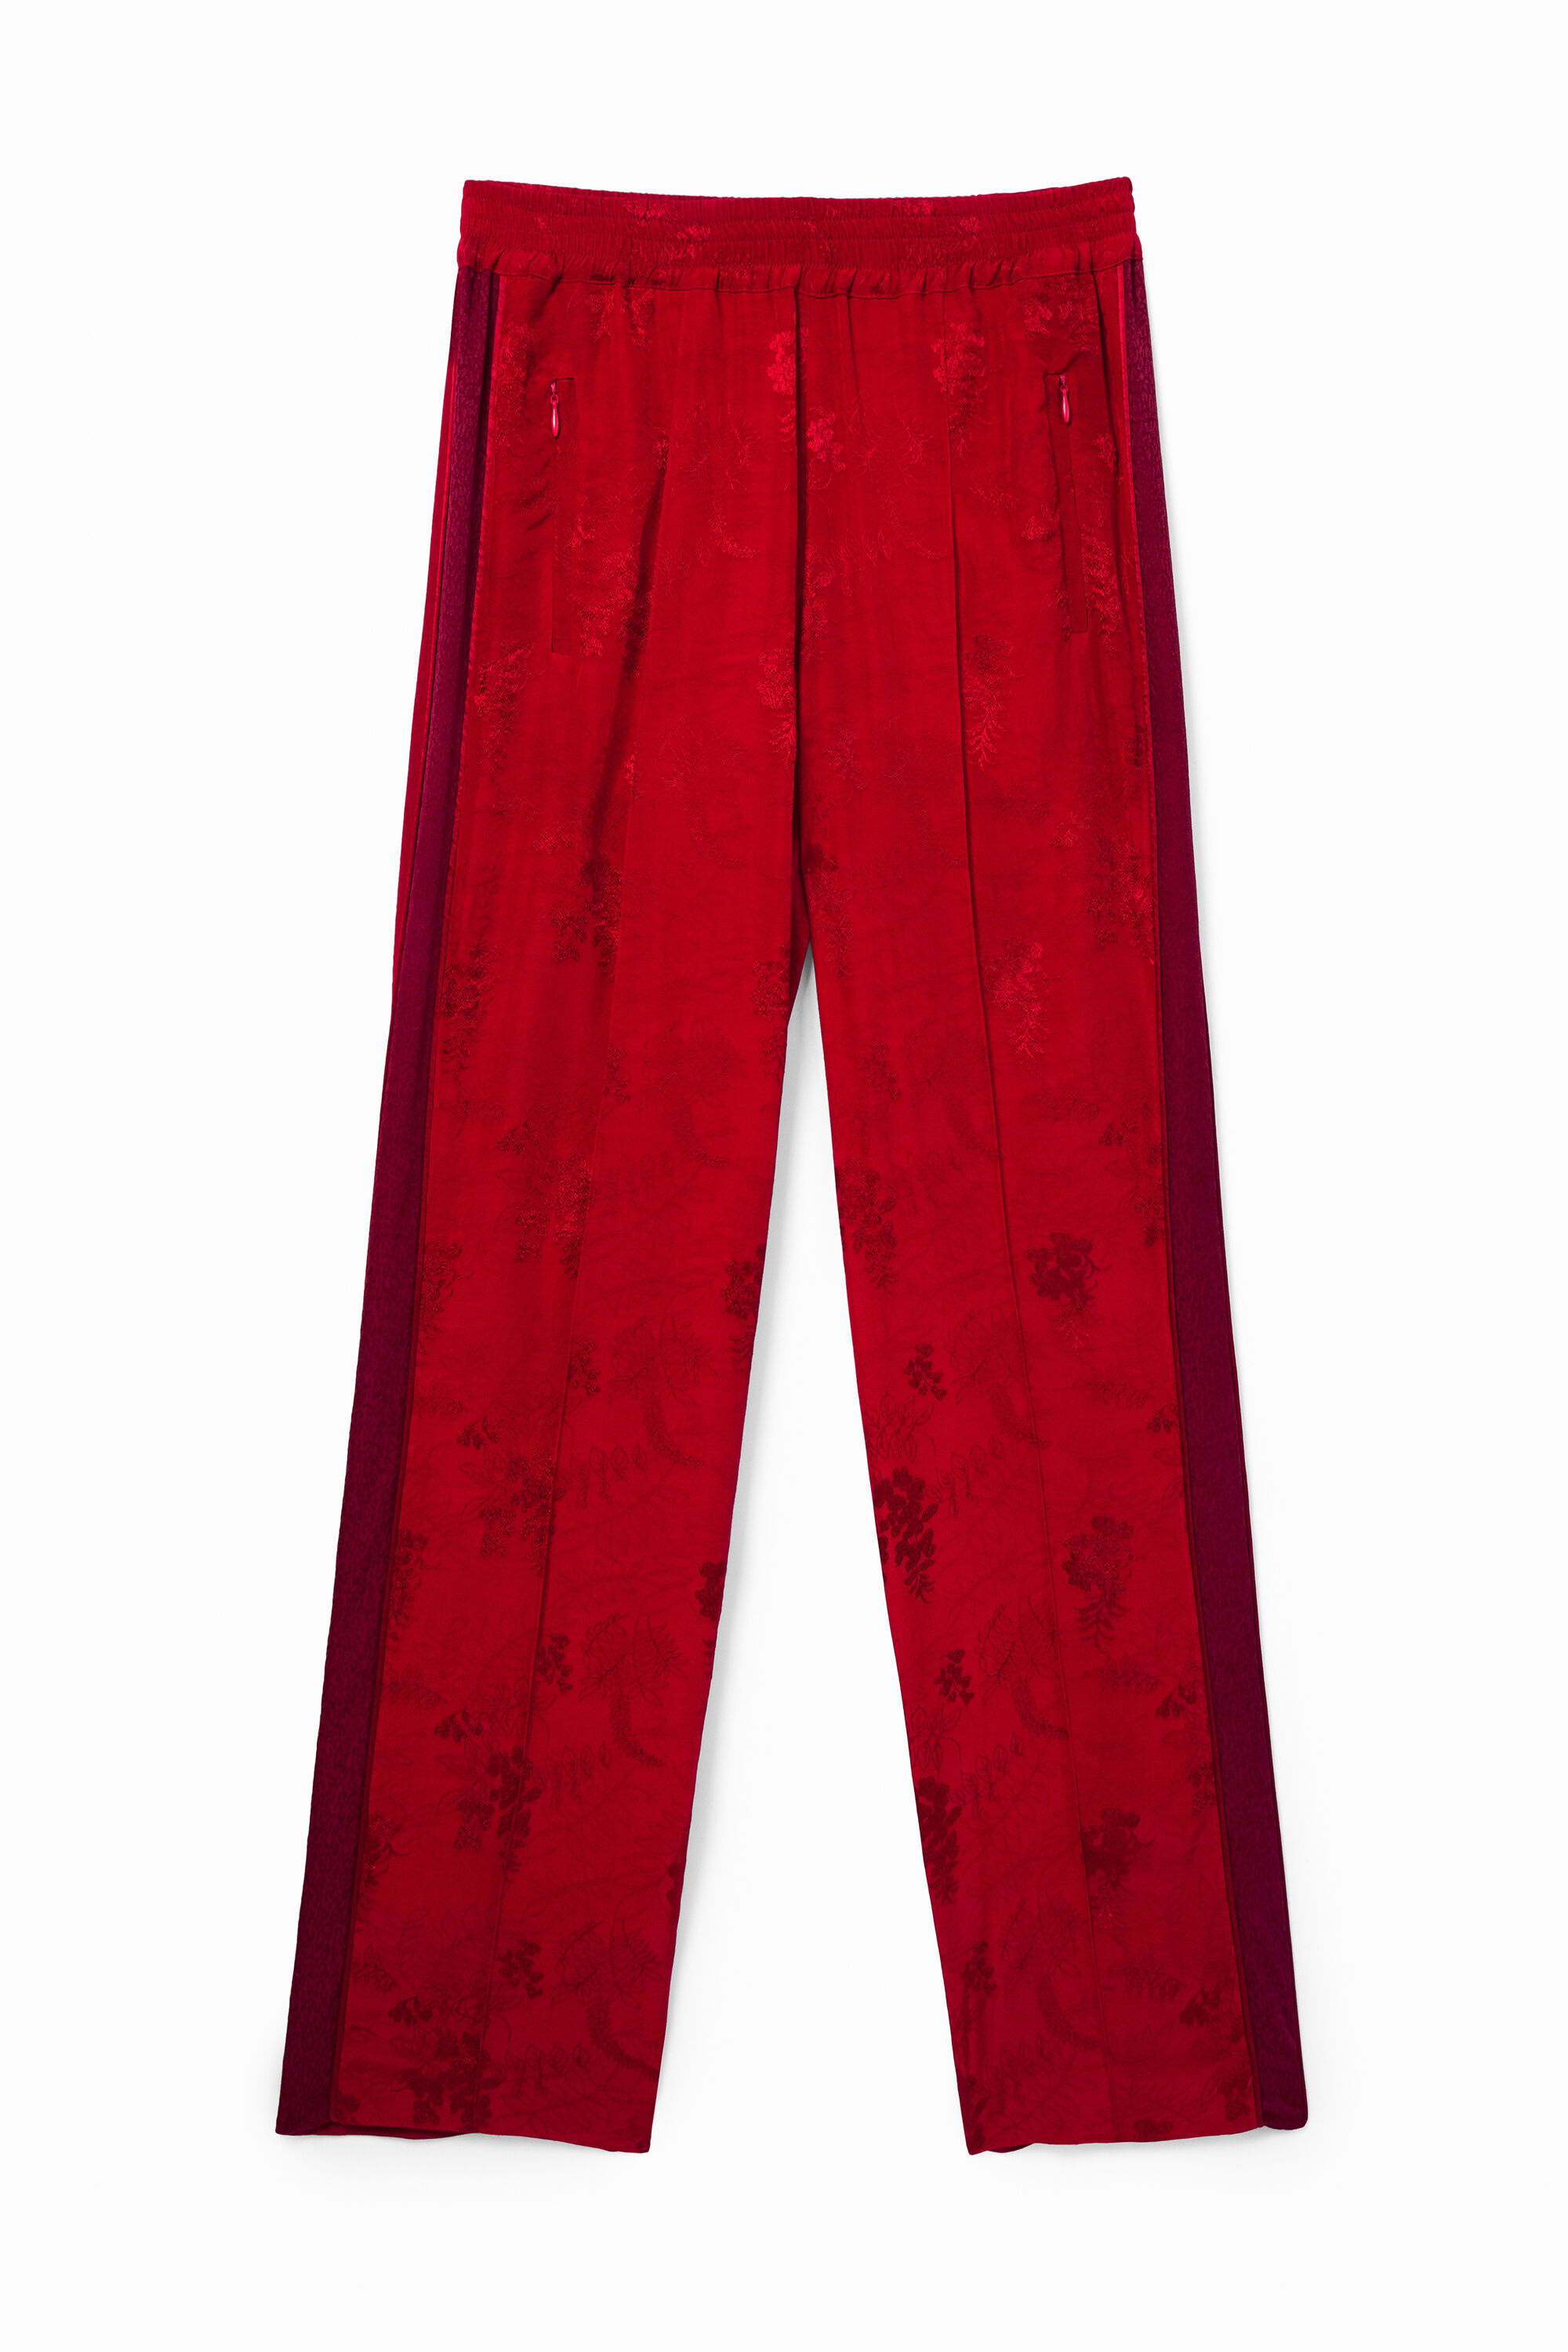 Jacquard sport trousers - RED - S